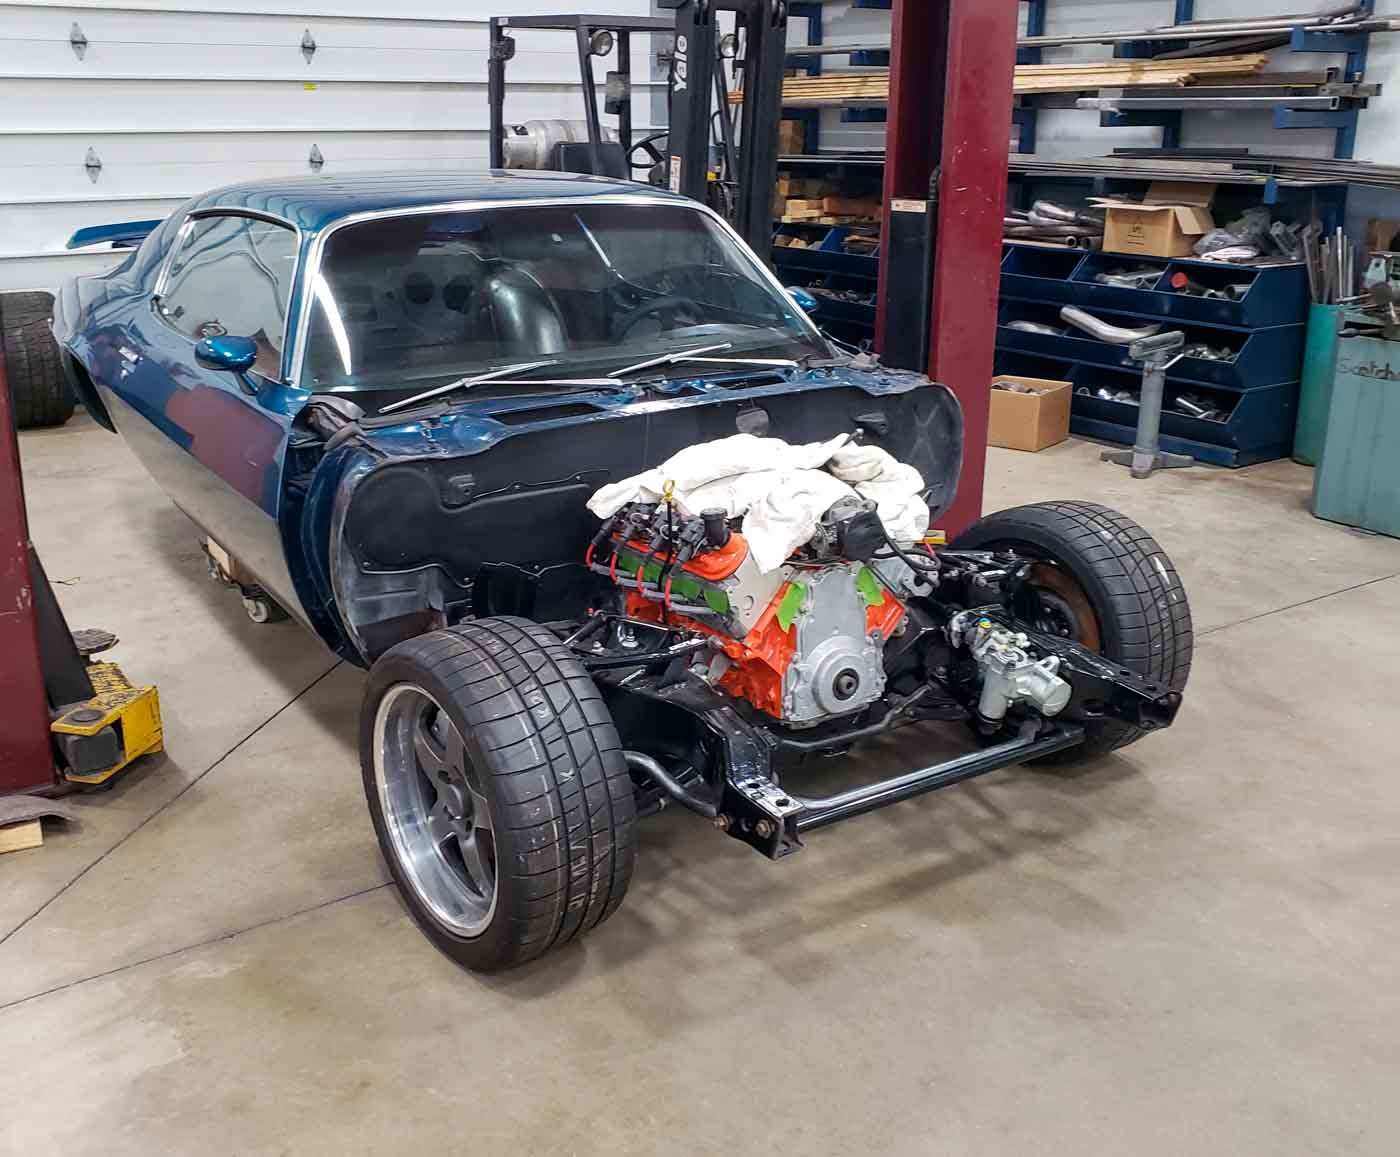 Camaro with front tin removed